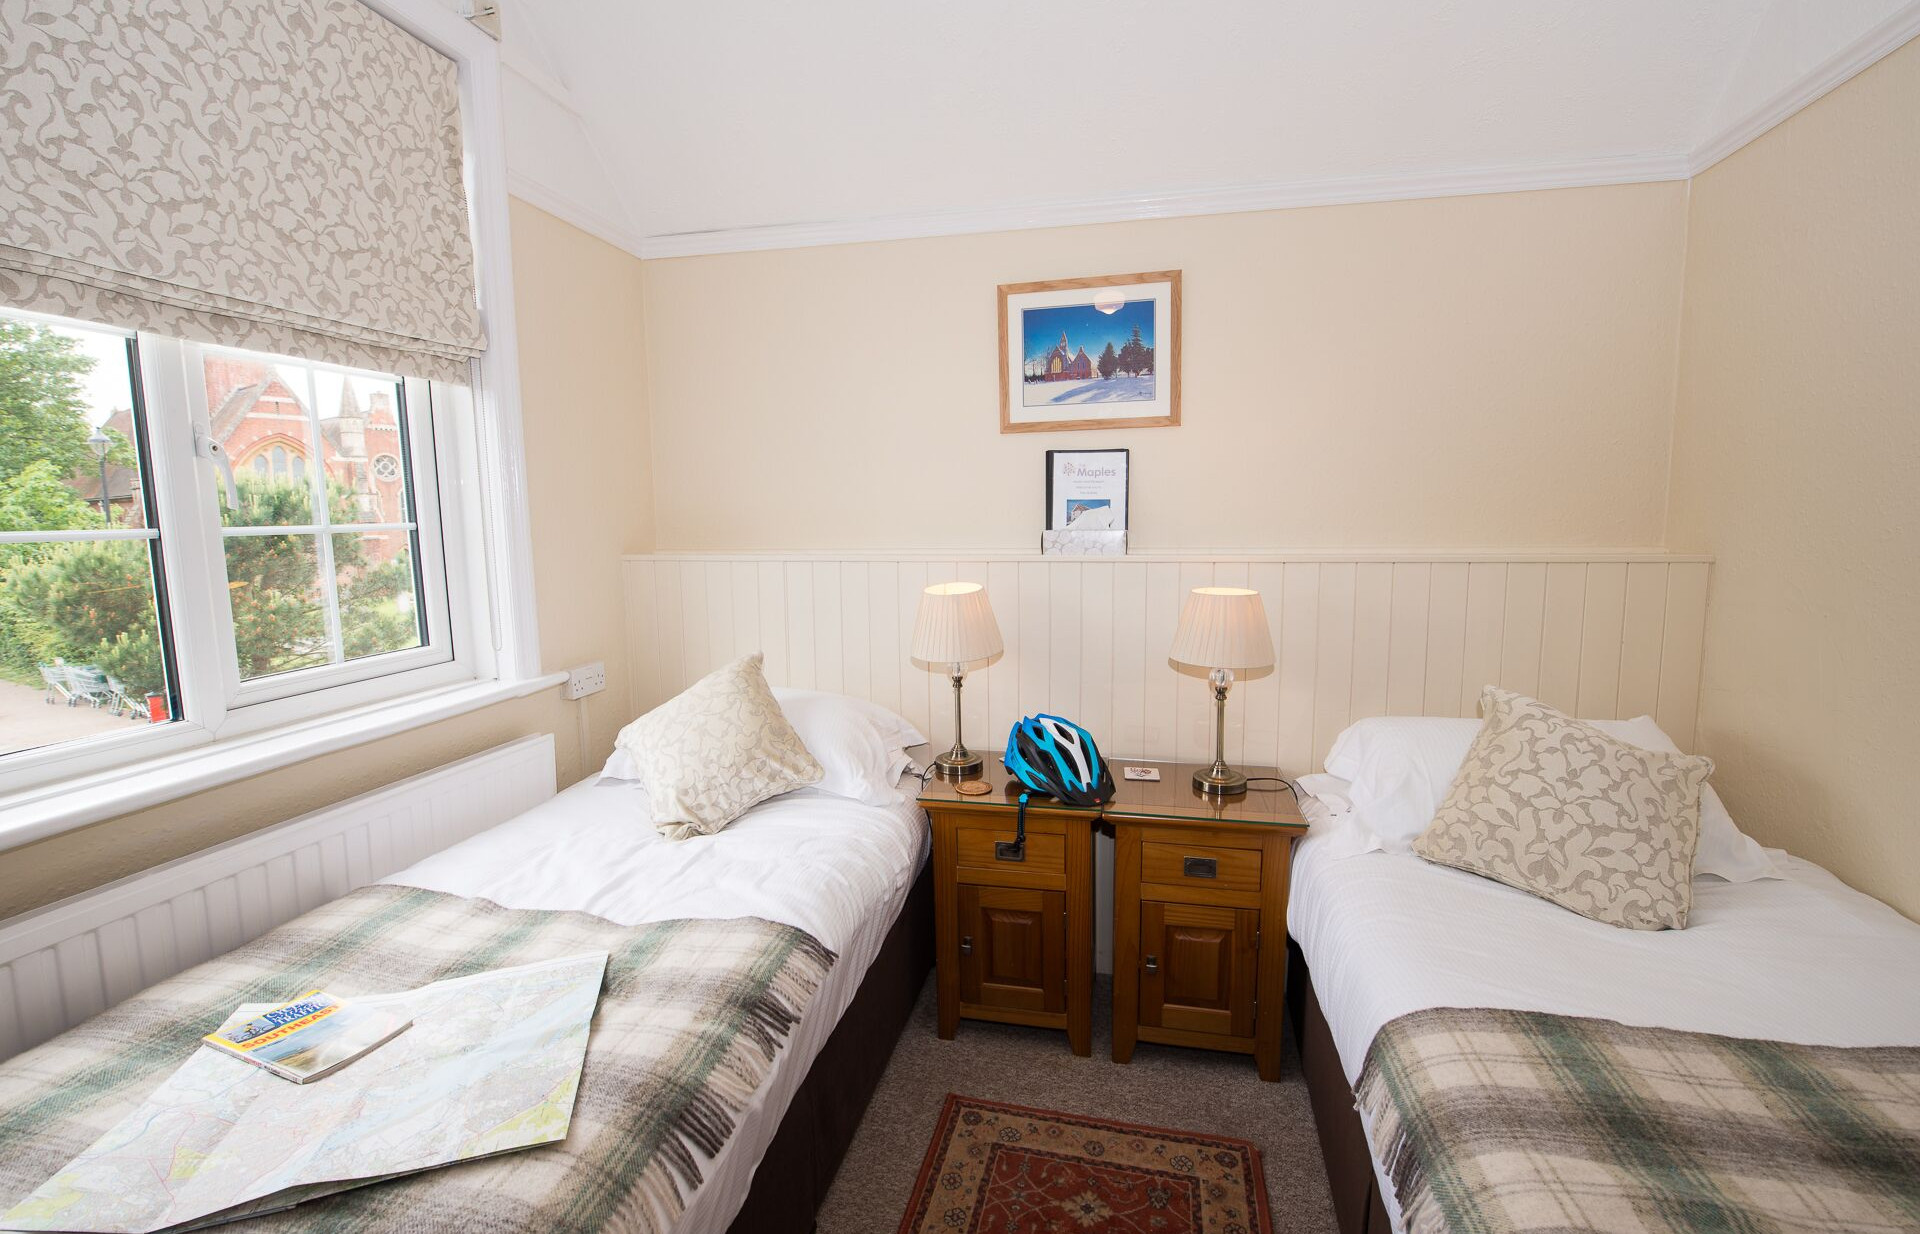 Bed and Breakfast Room 3 in Ashurst